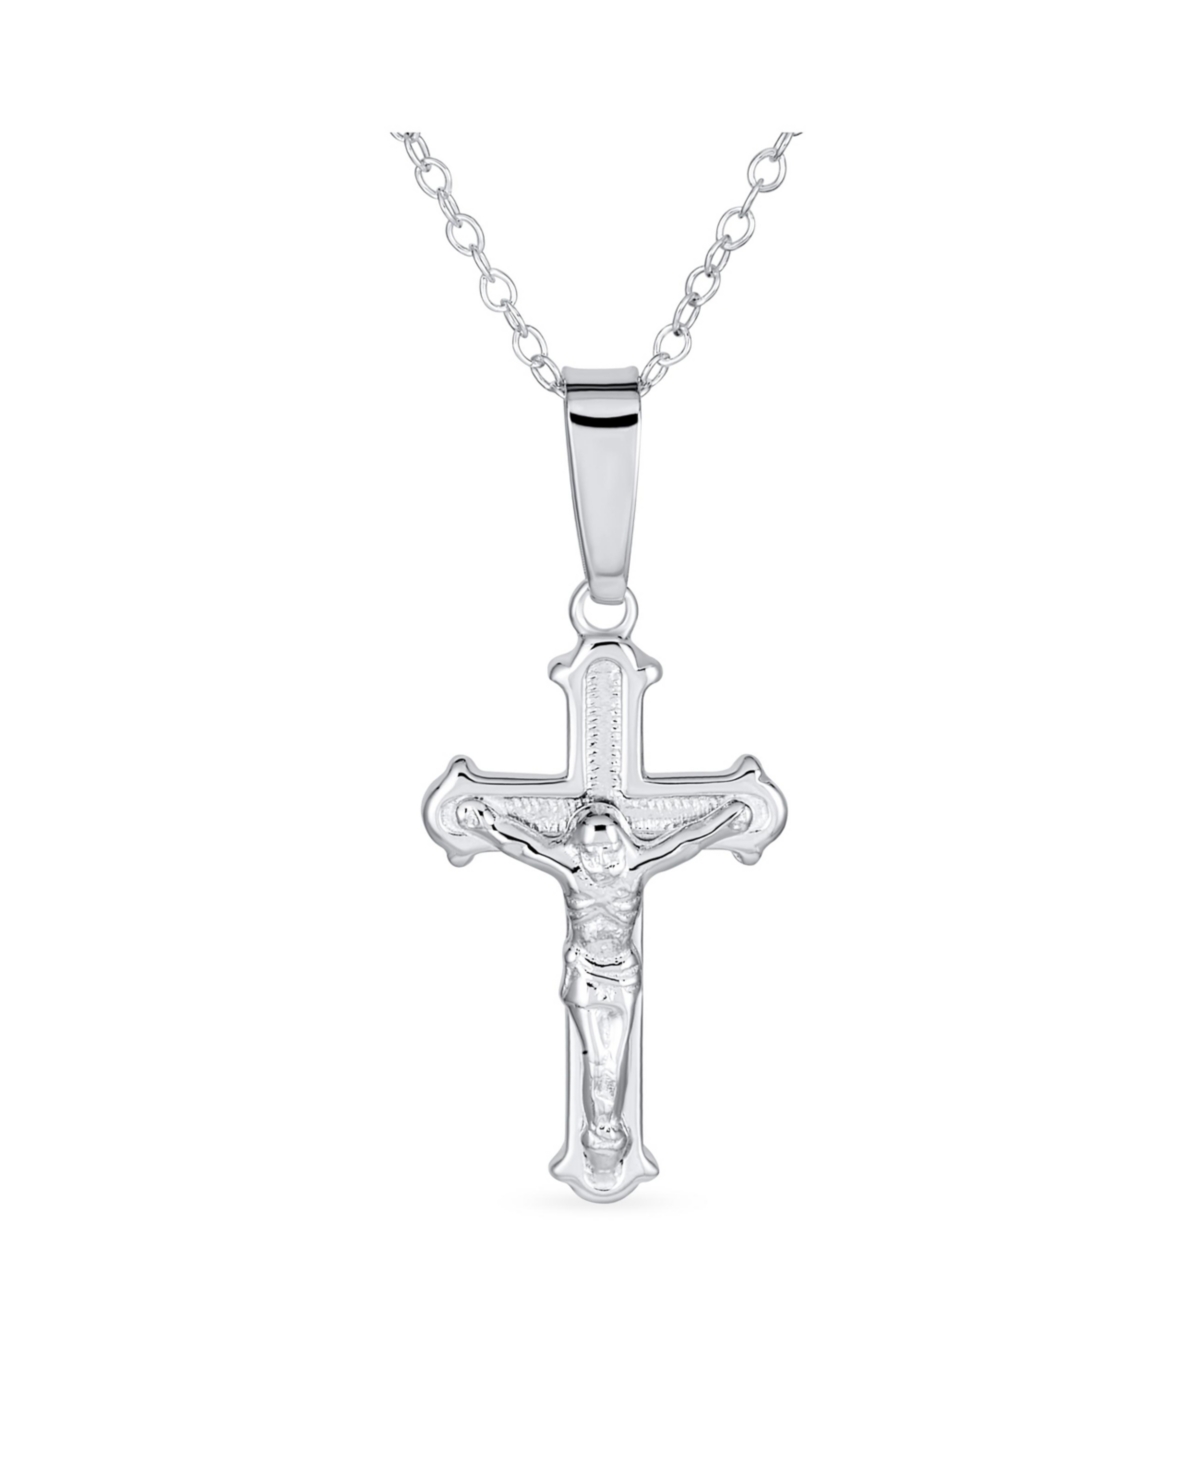 Simple Christian Catholic Religious Jewelry Traditional Passion Jesus Crucifix Cross Necklace Pendant For Women Teen .925 Sterling Silve